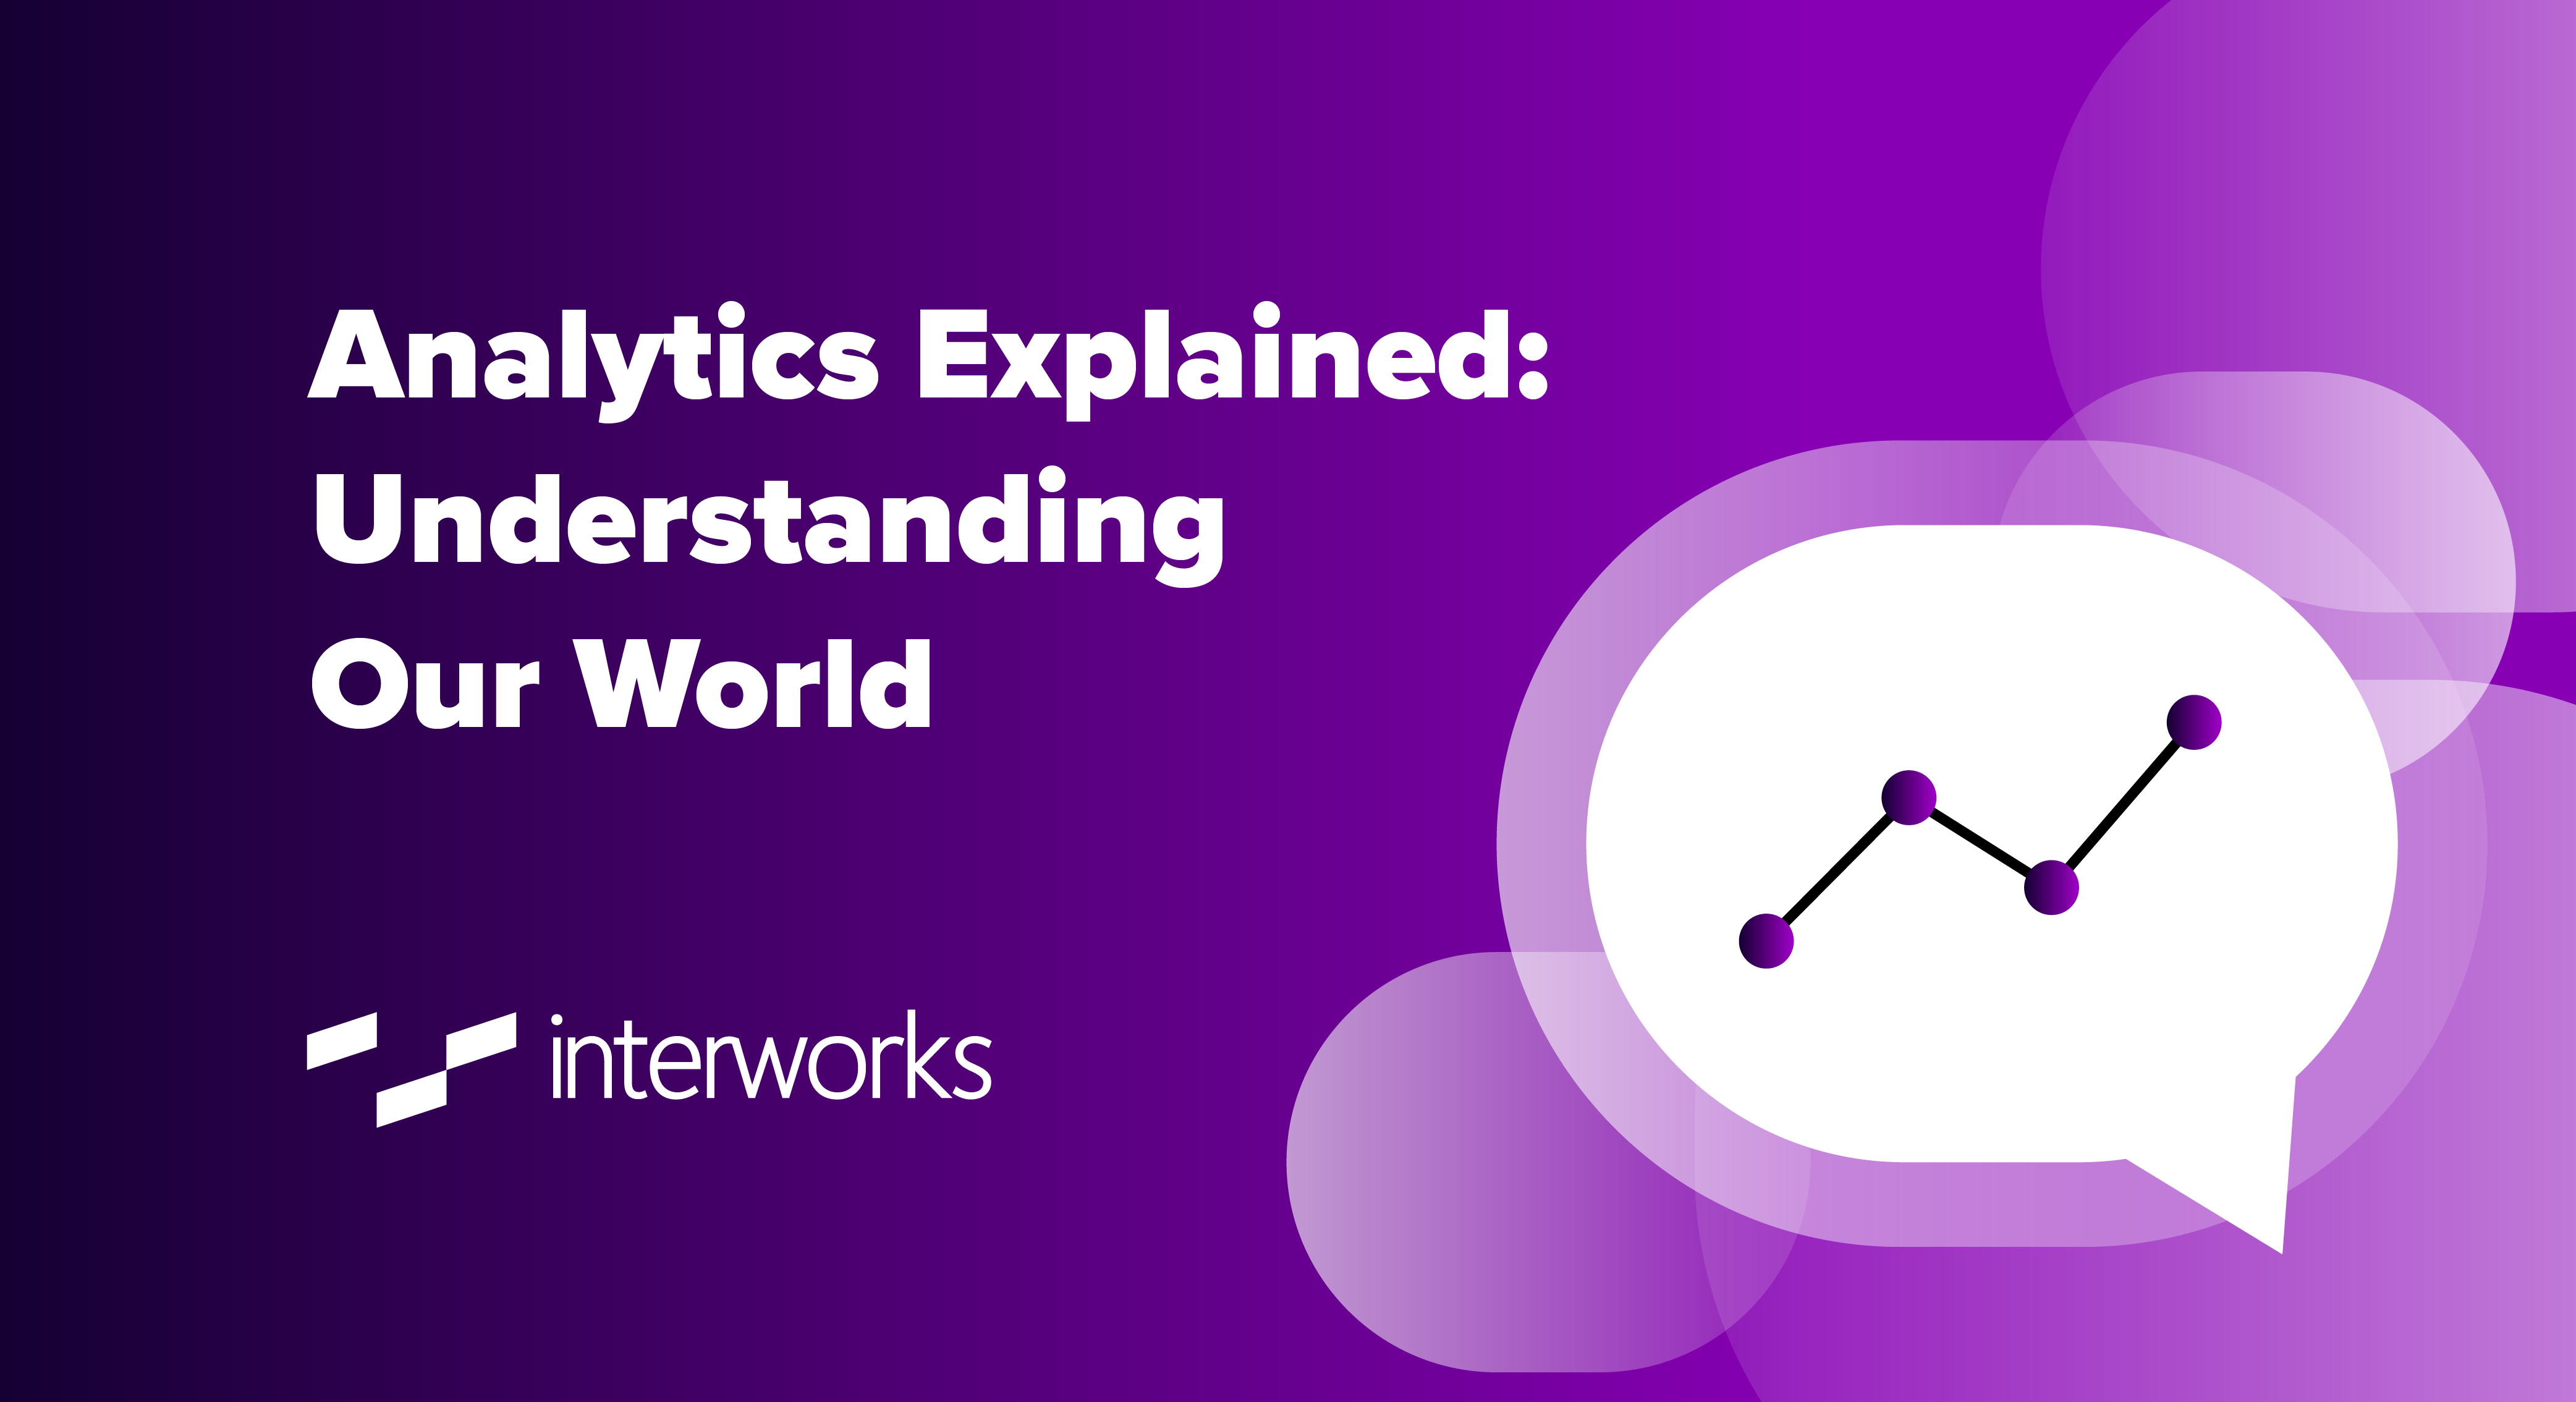 Analytics Explained: Understanding Our World